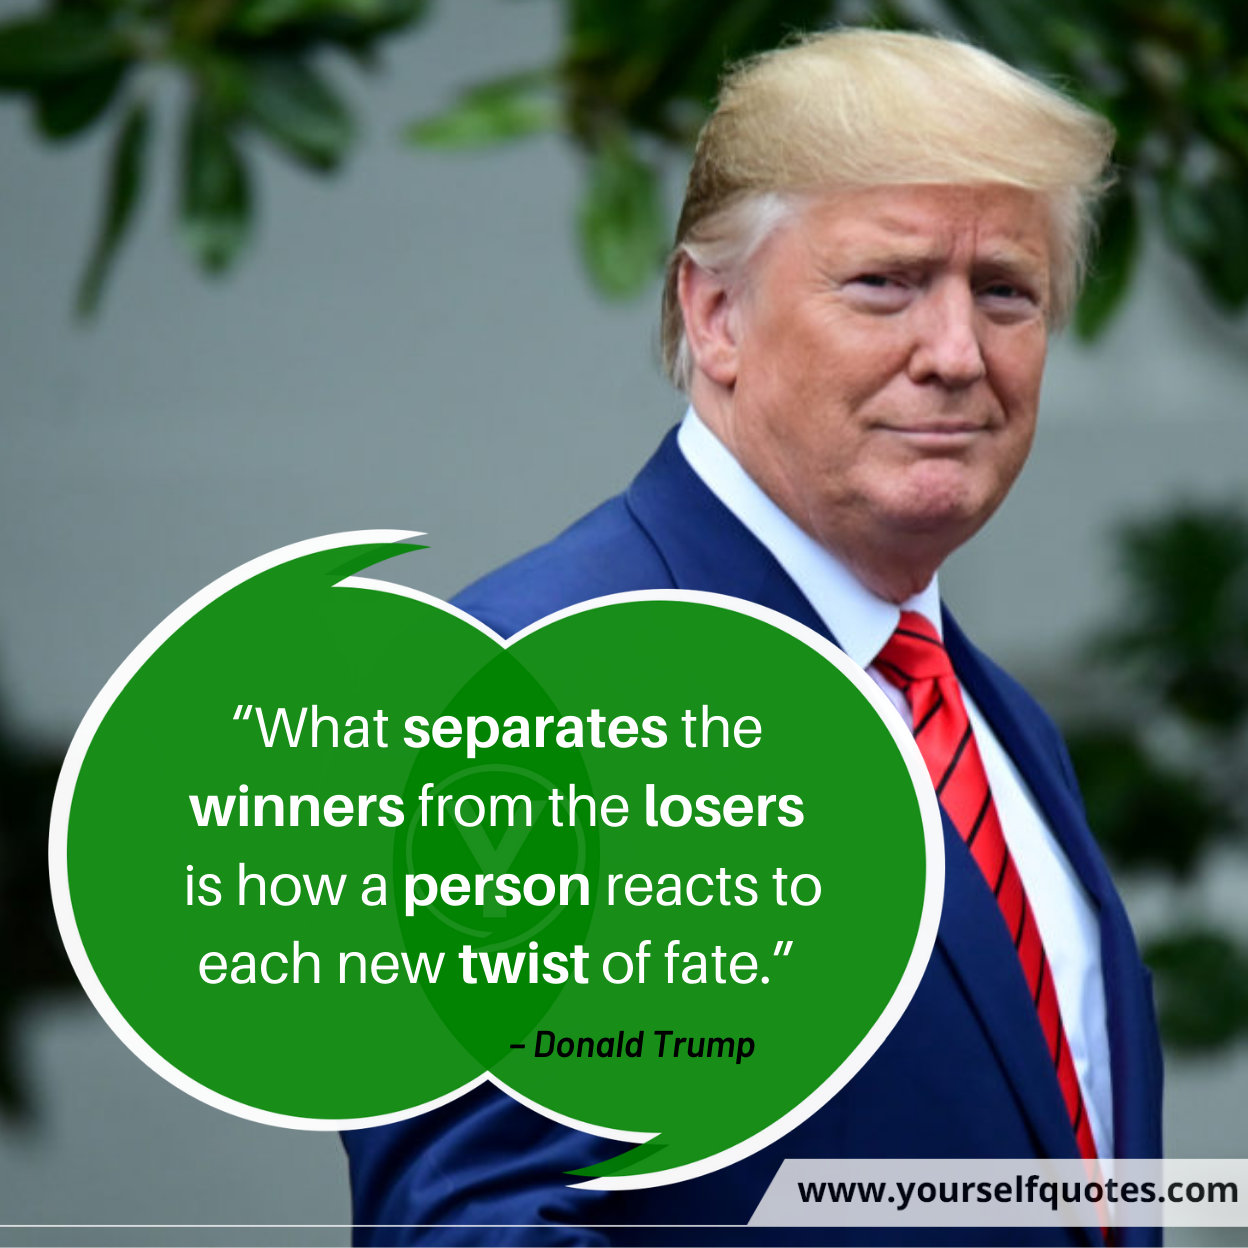 Quotes by Donald Trump